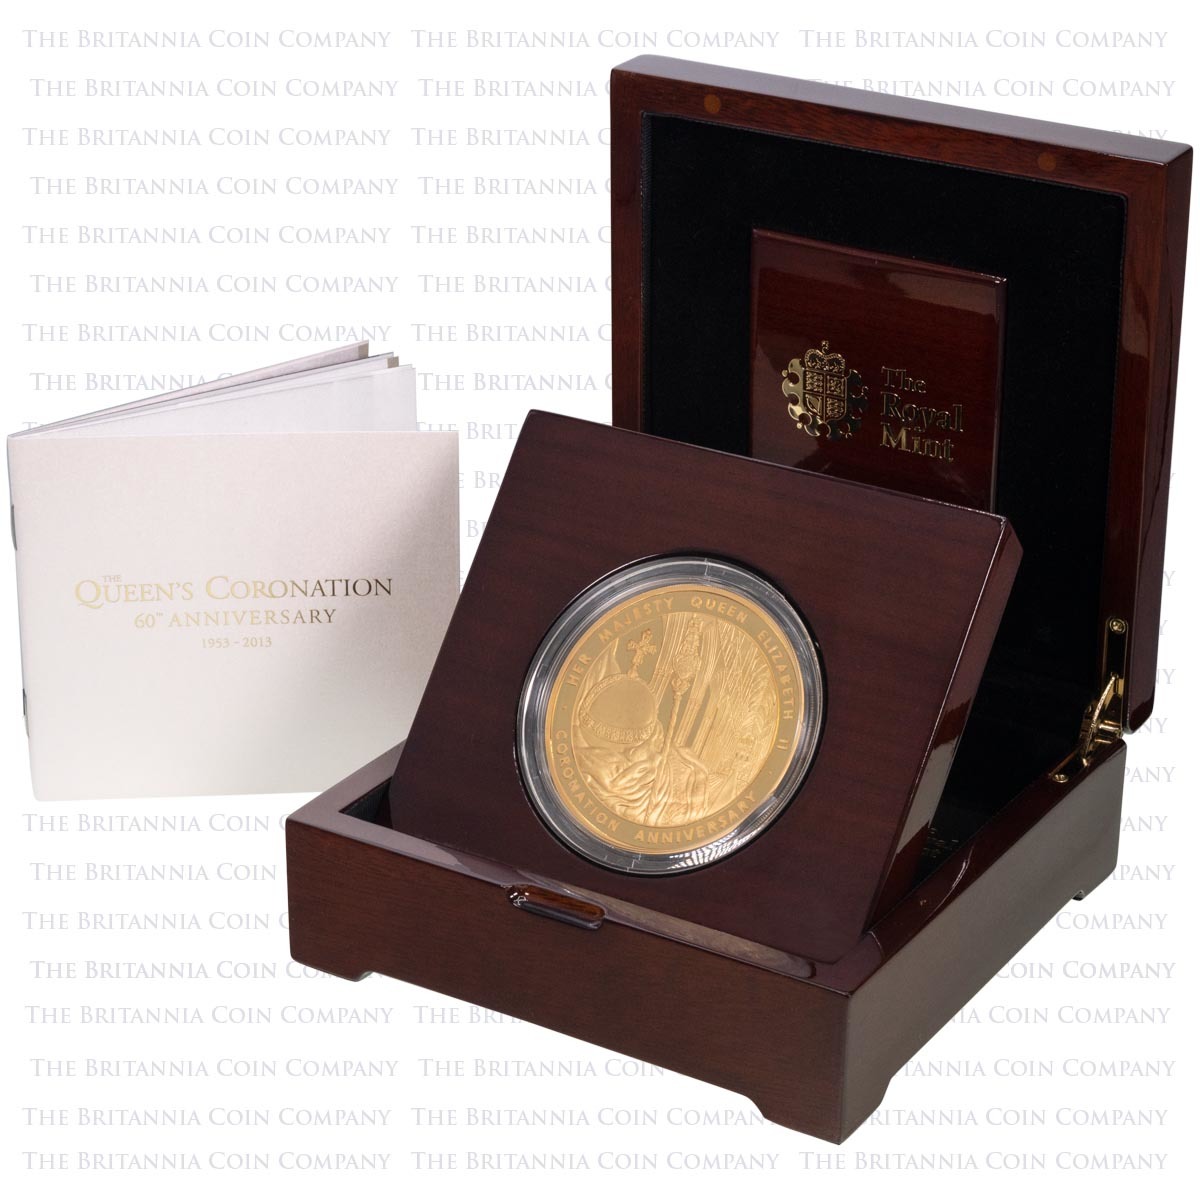 Uk13CO5G 2013 Queen's Coronation Anniversary Five Ounce Gold Proof Coin Boxed